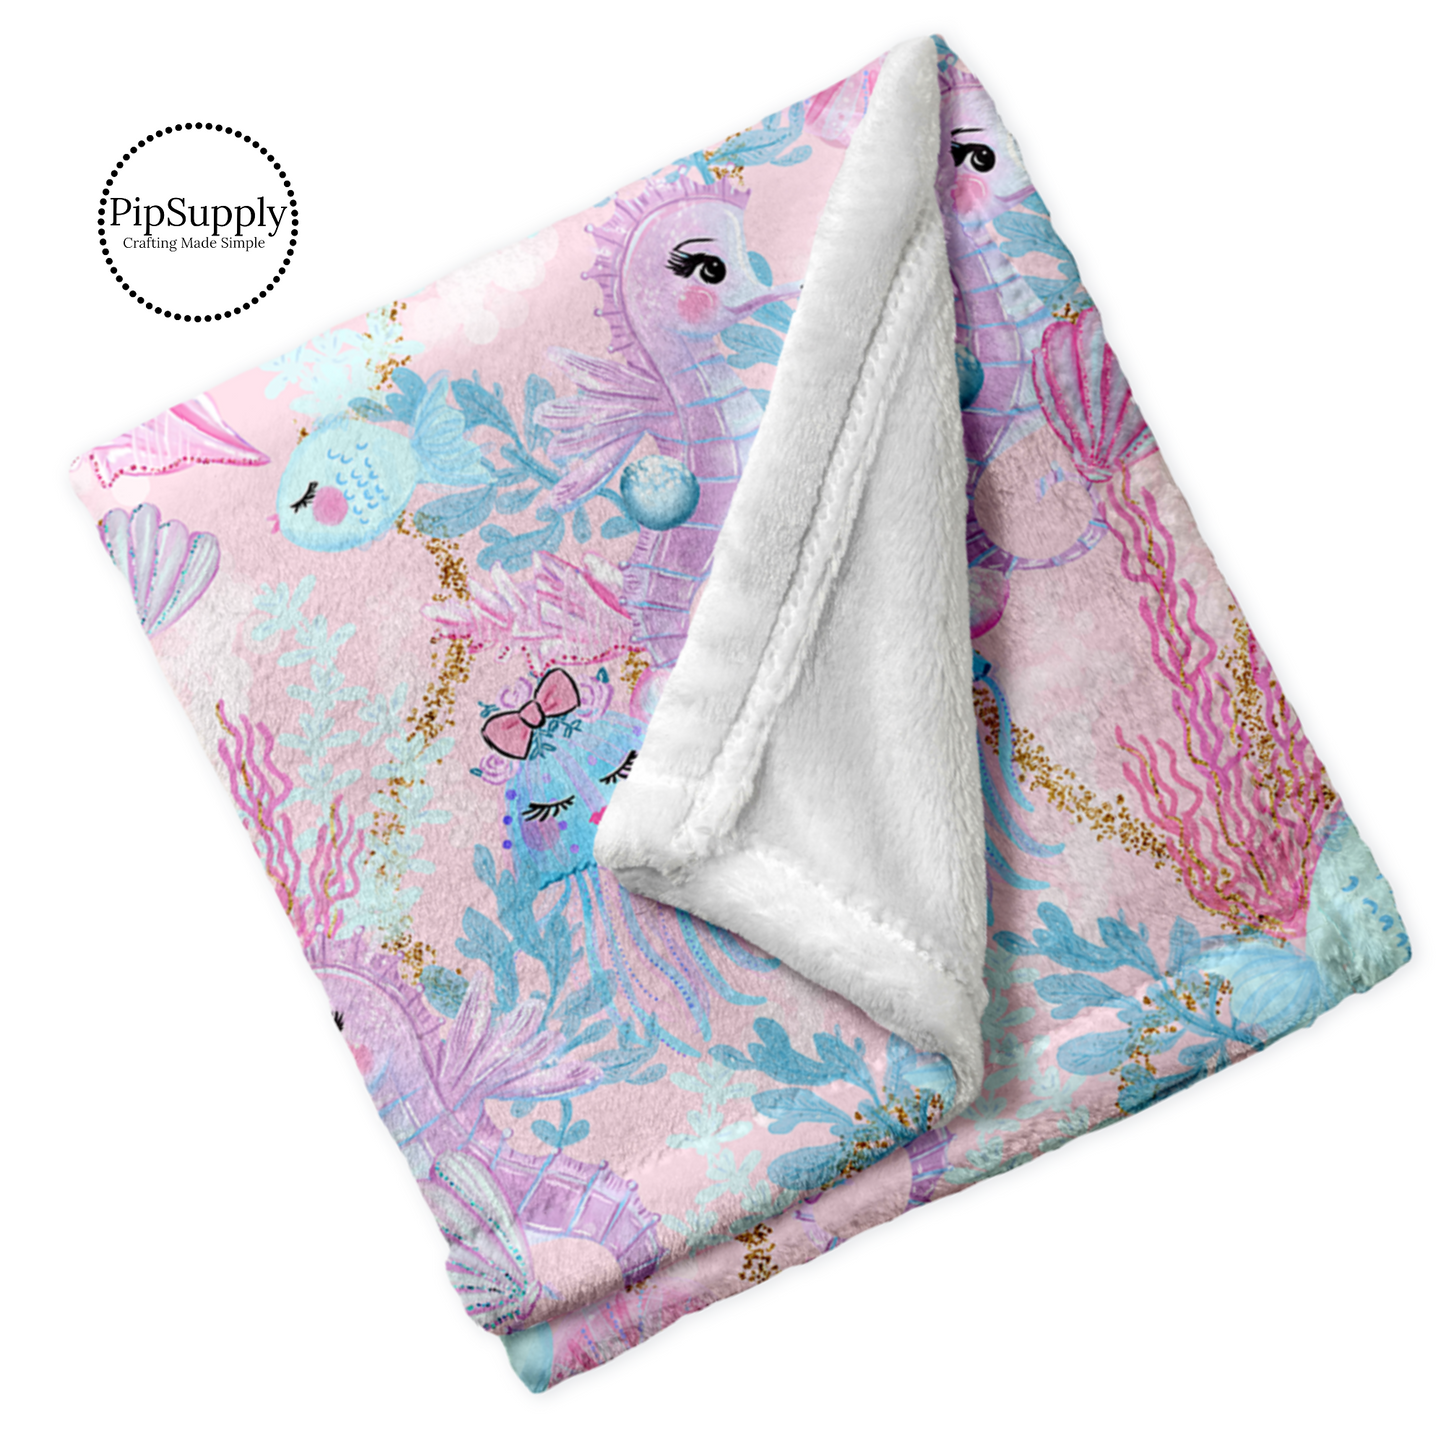 Folded white soft blanket with print of watercolor seahorses, fish, coral, and jelly fish in pink, blue, and purple.